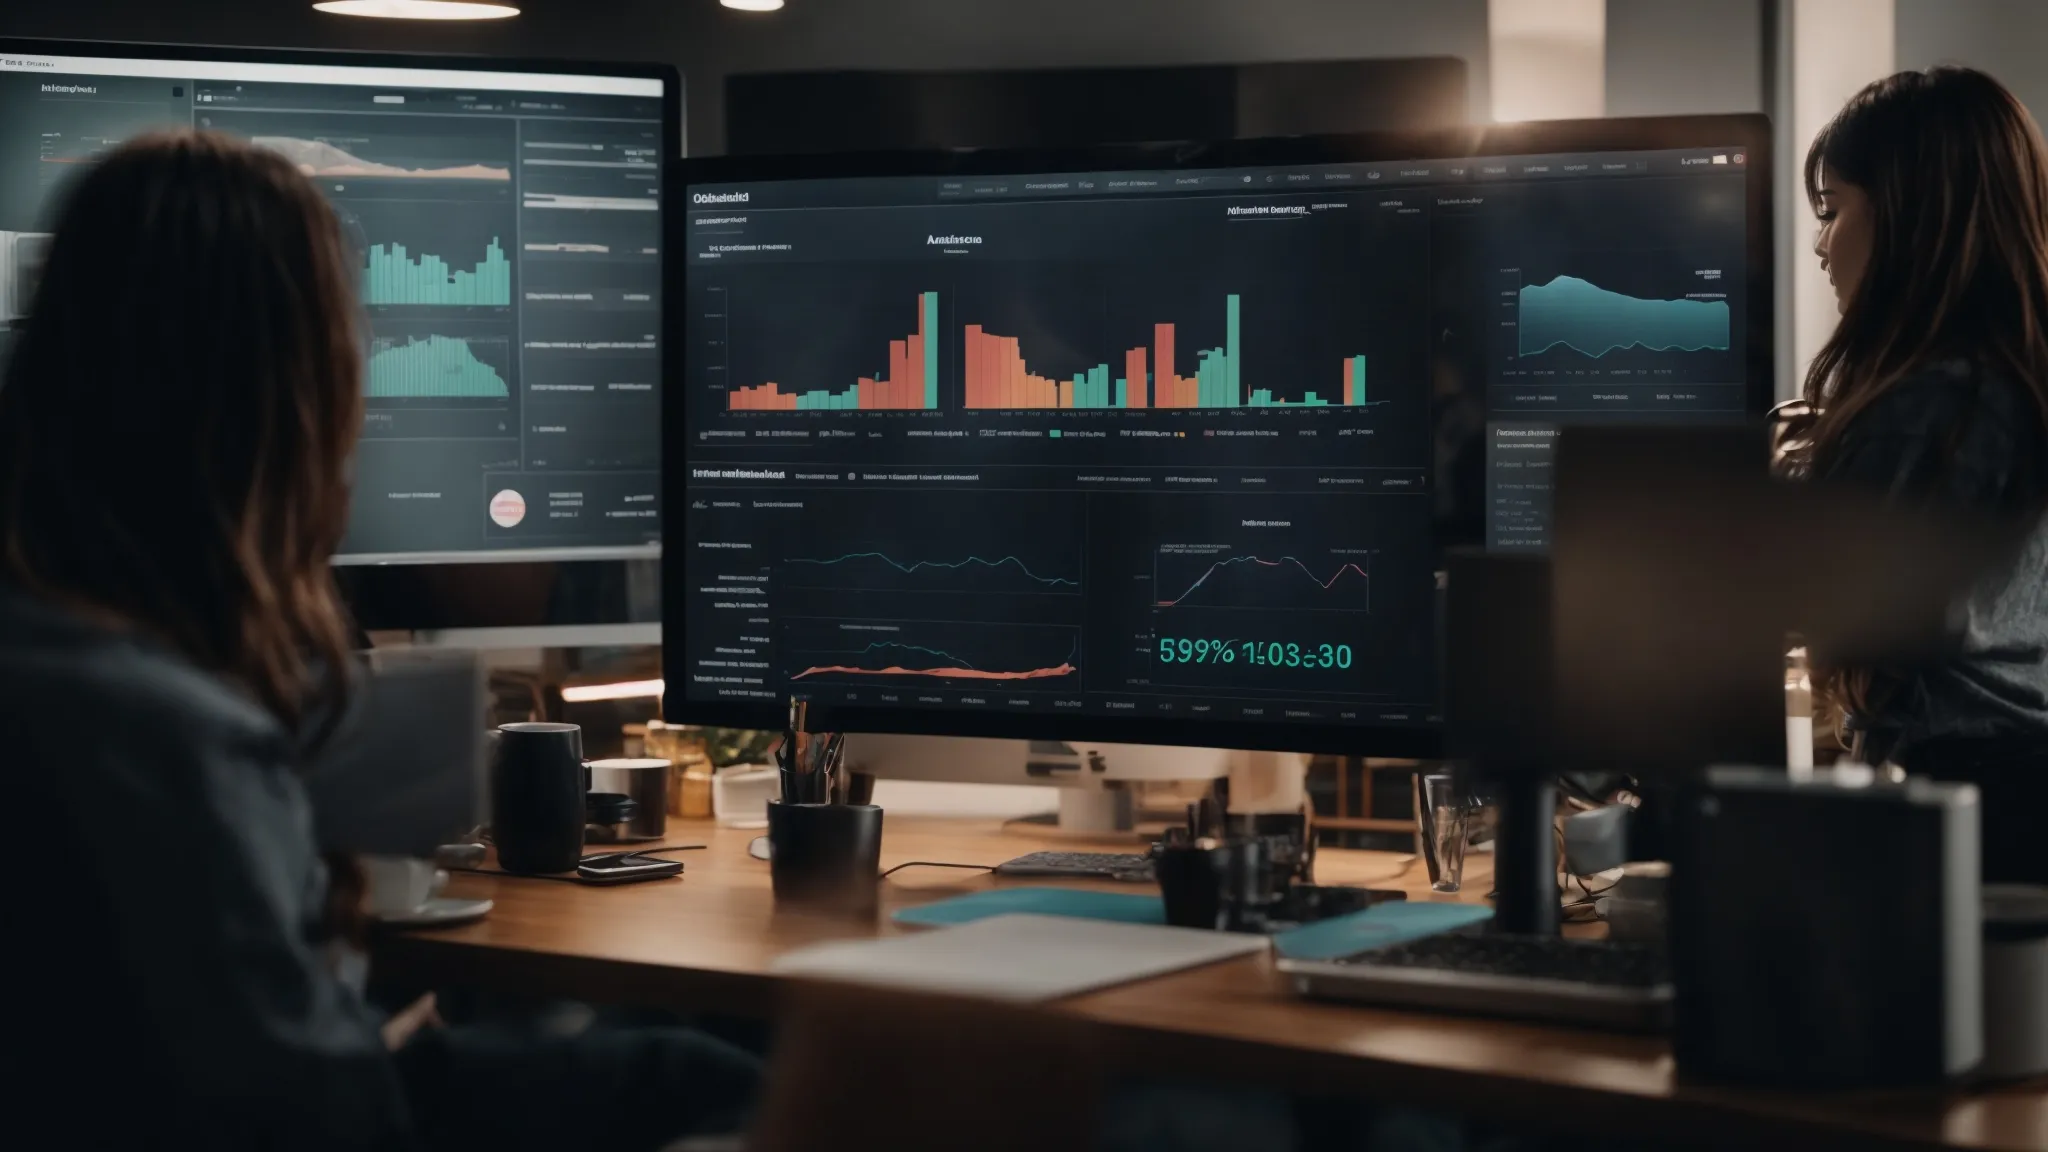 a digital marketing team observes a live analytics dashboard reflecting customer interactions and preferences, adjusting campaign strategies in real-time.